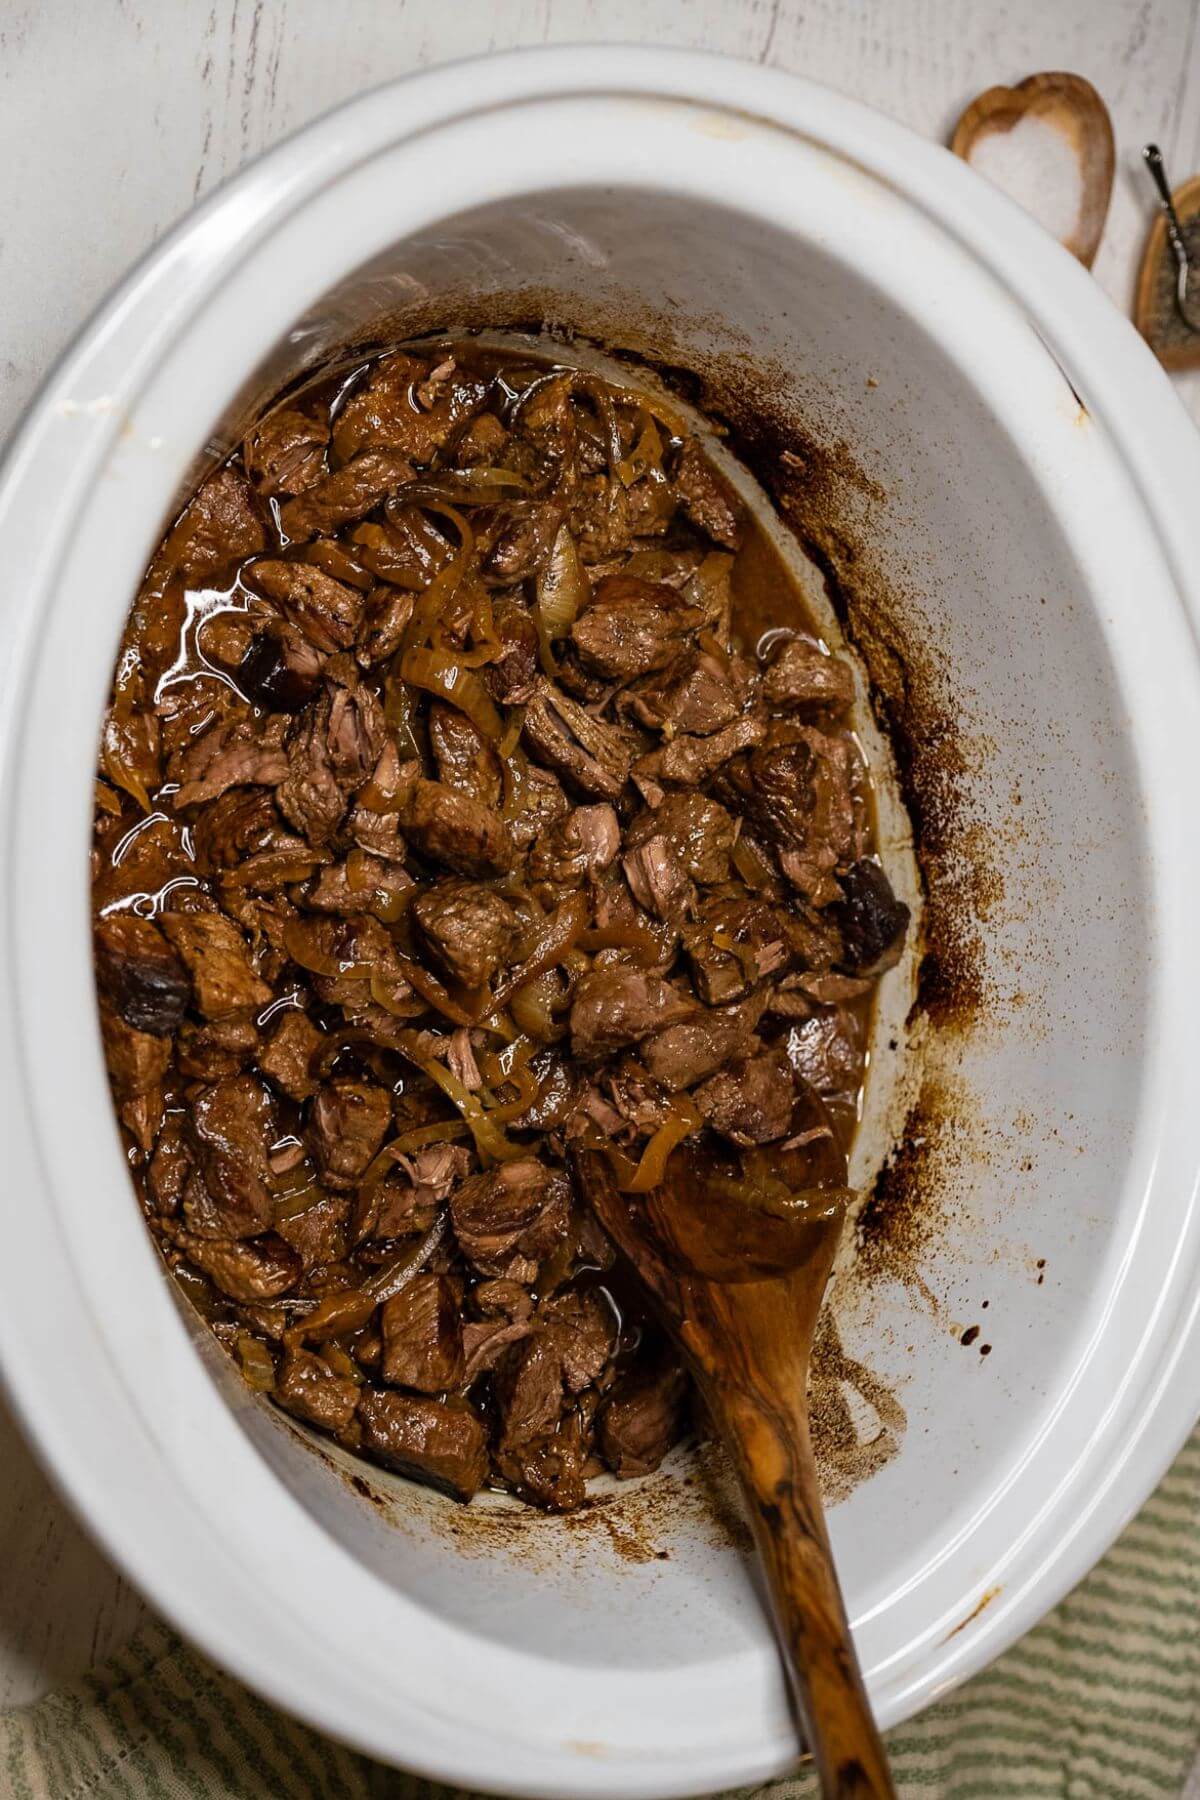 An open crock pot shows steak chunks, onions, and sauce stirred by spoon.